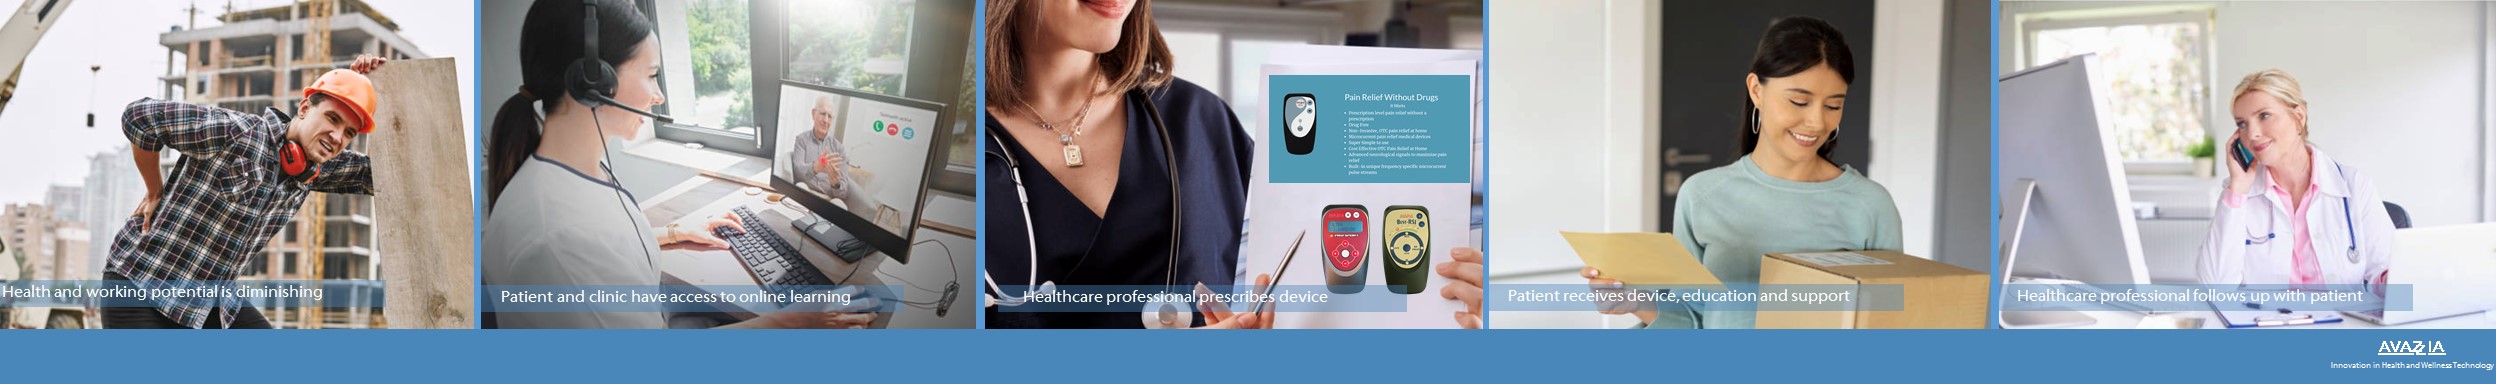 Determine which device is right for patient's pain relief